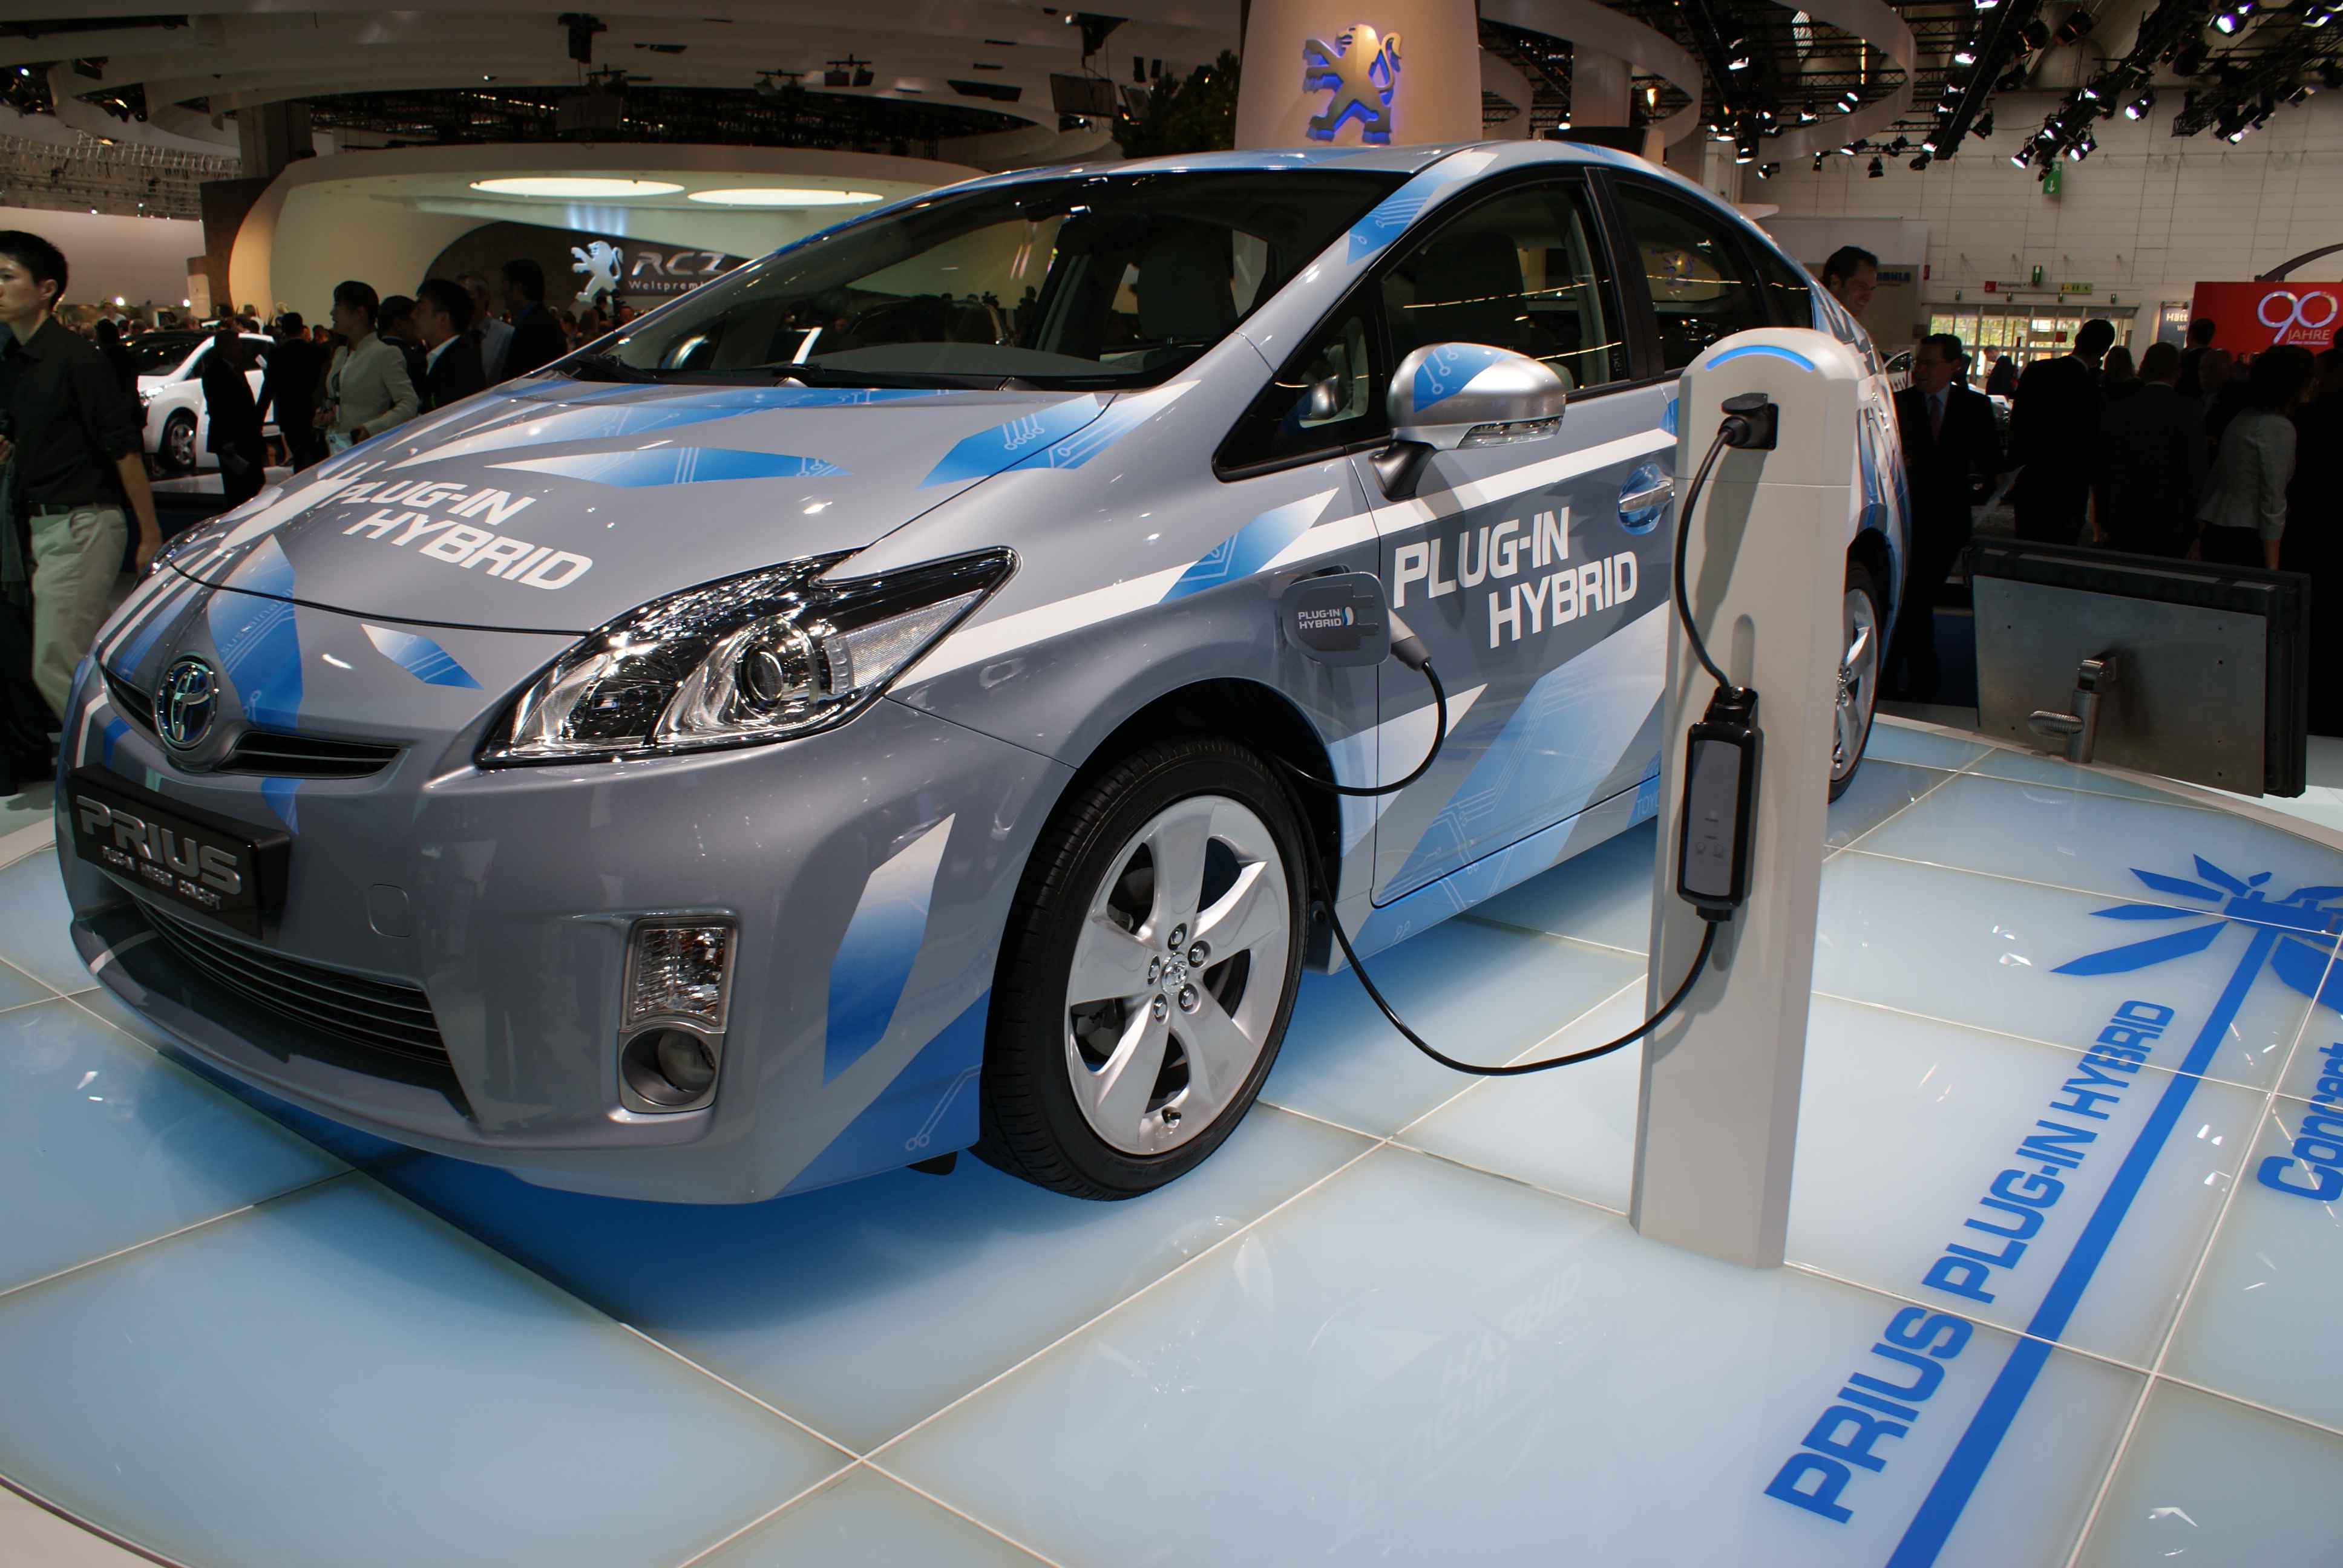 Toyota Prius Plug-in Hybrid mod specifications